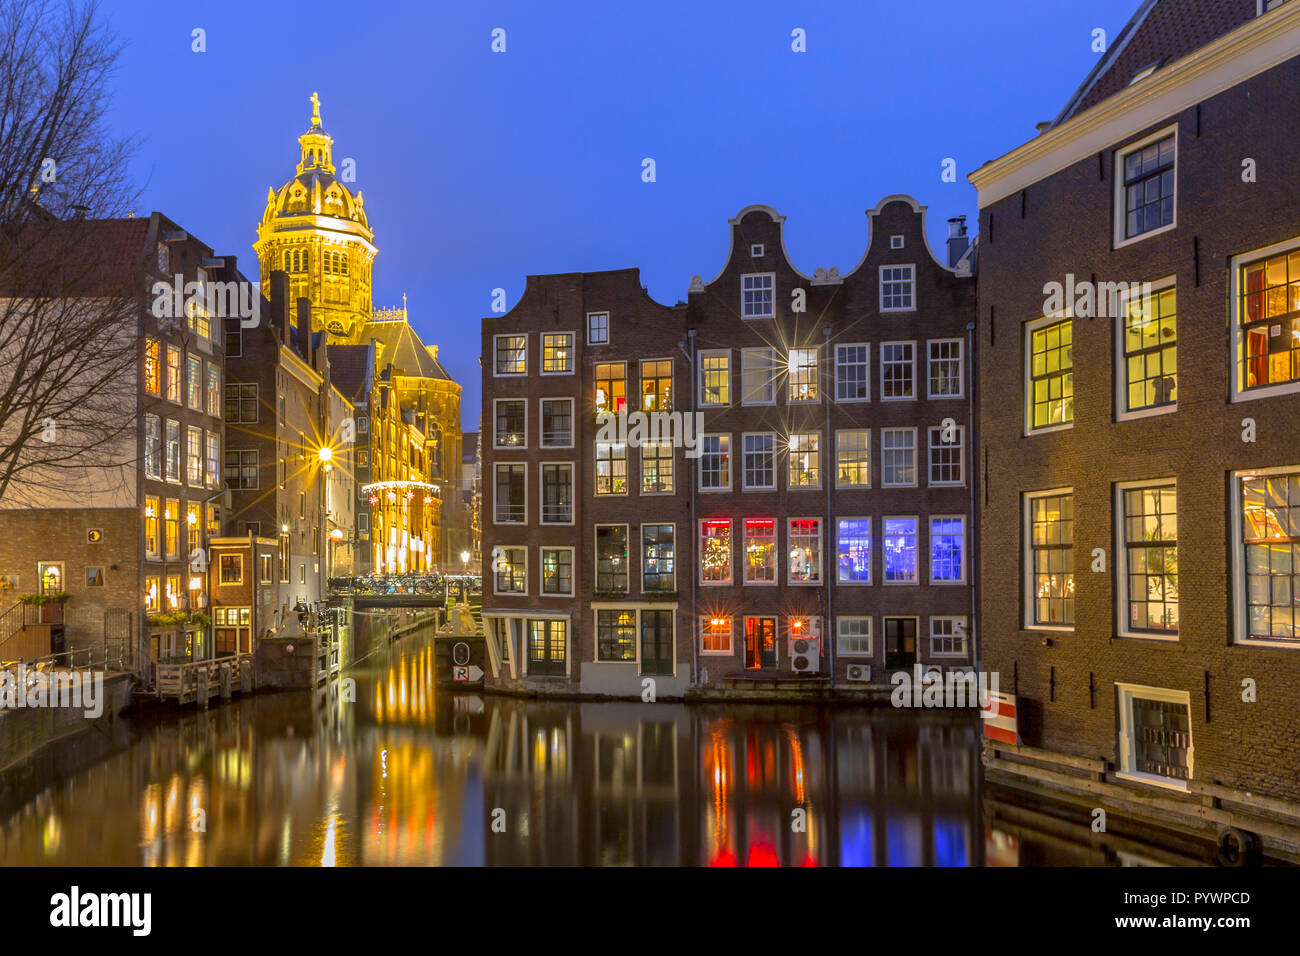 Nightscape of colorful traditional waterfront canal houses at night seen from the armbrug on the Oudezijds Voorburgwal in the UNESCO World Heritage si Stock Photo